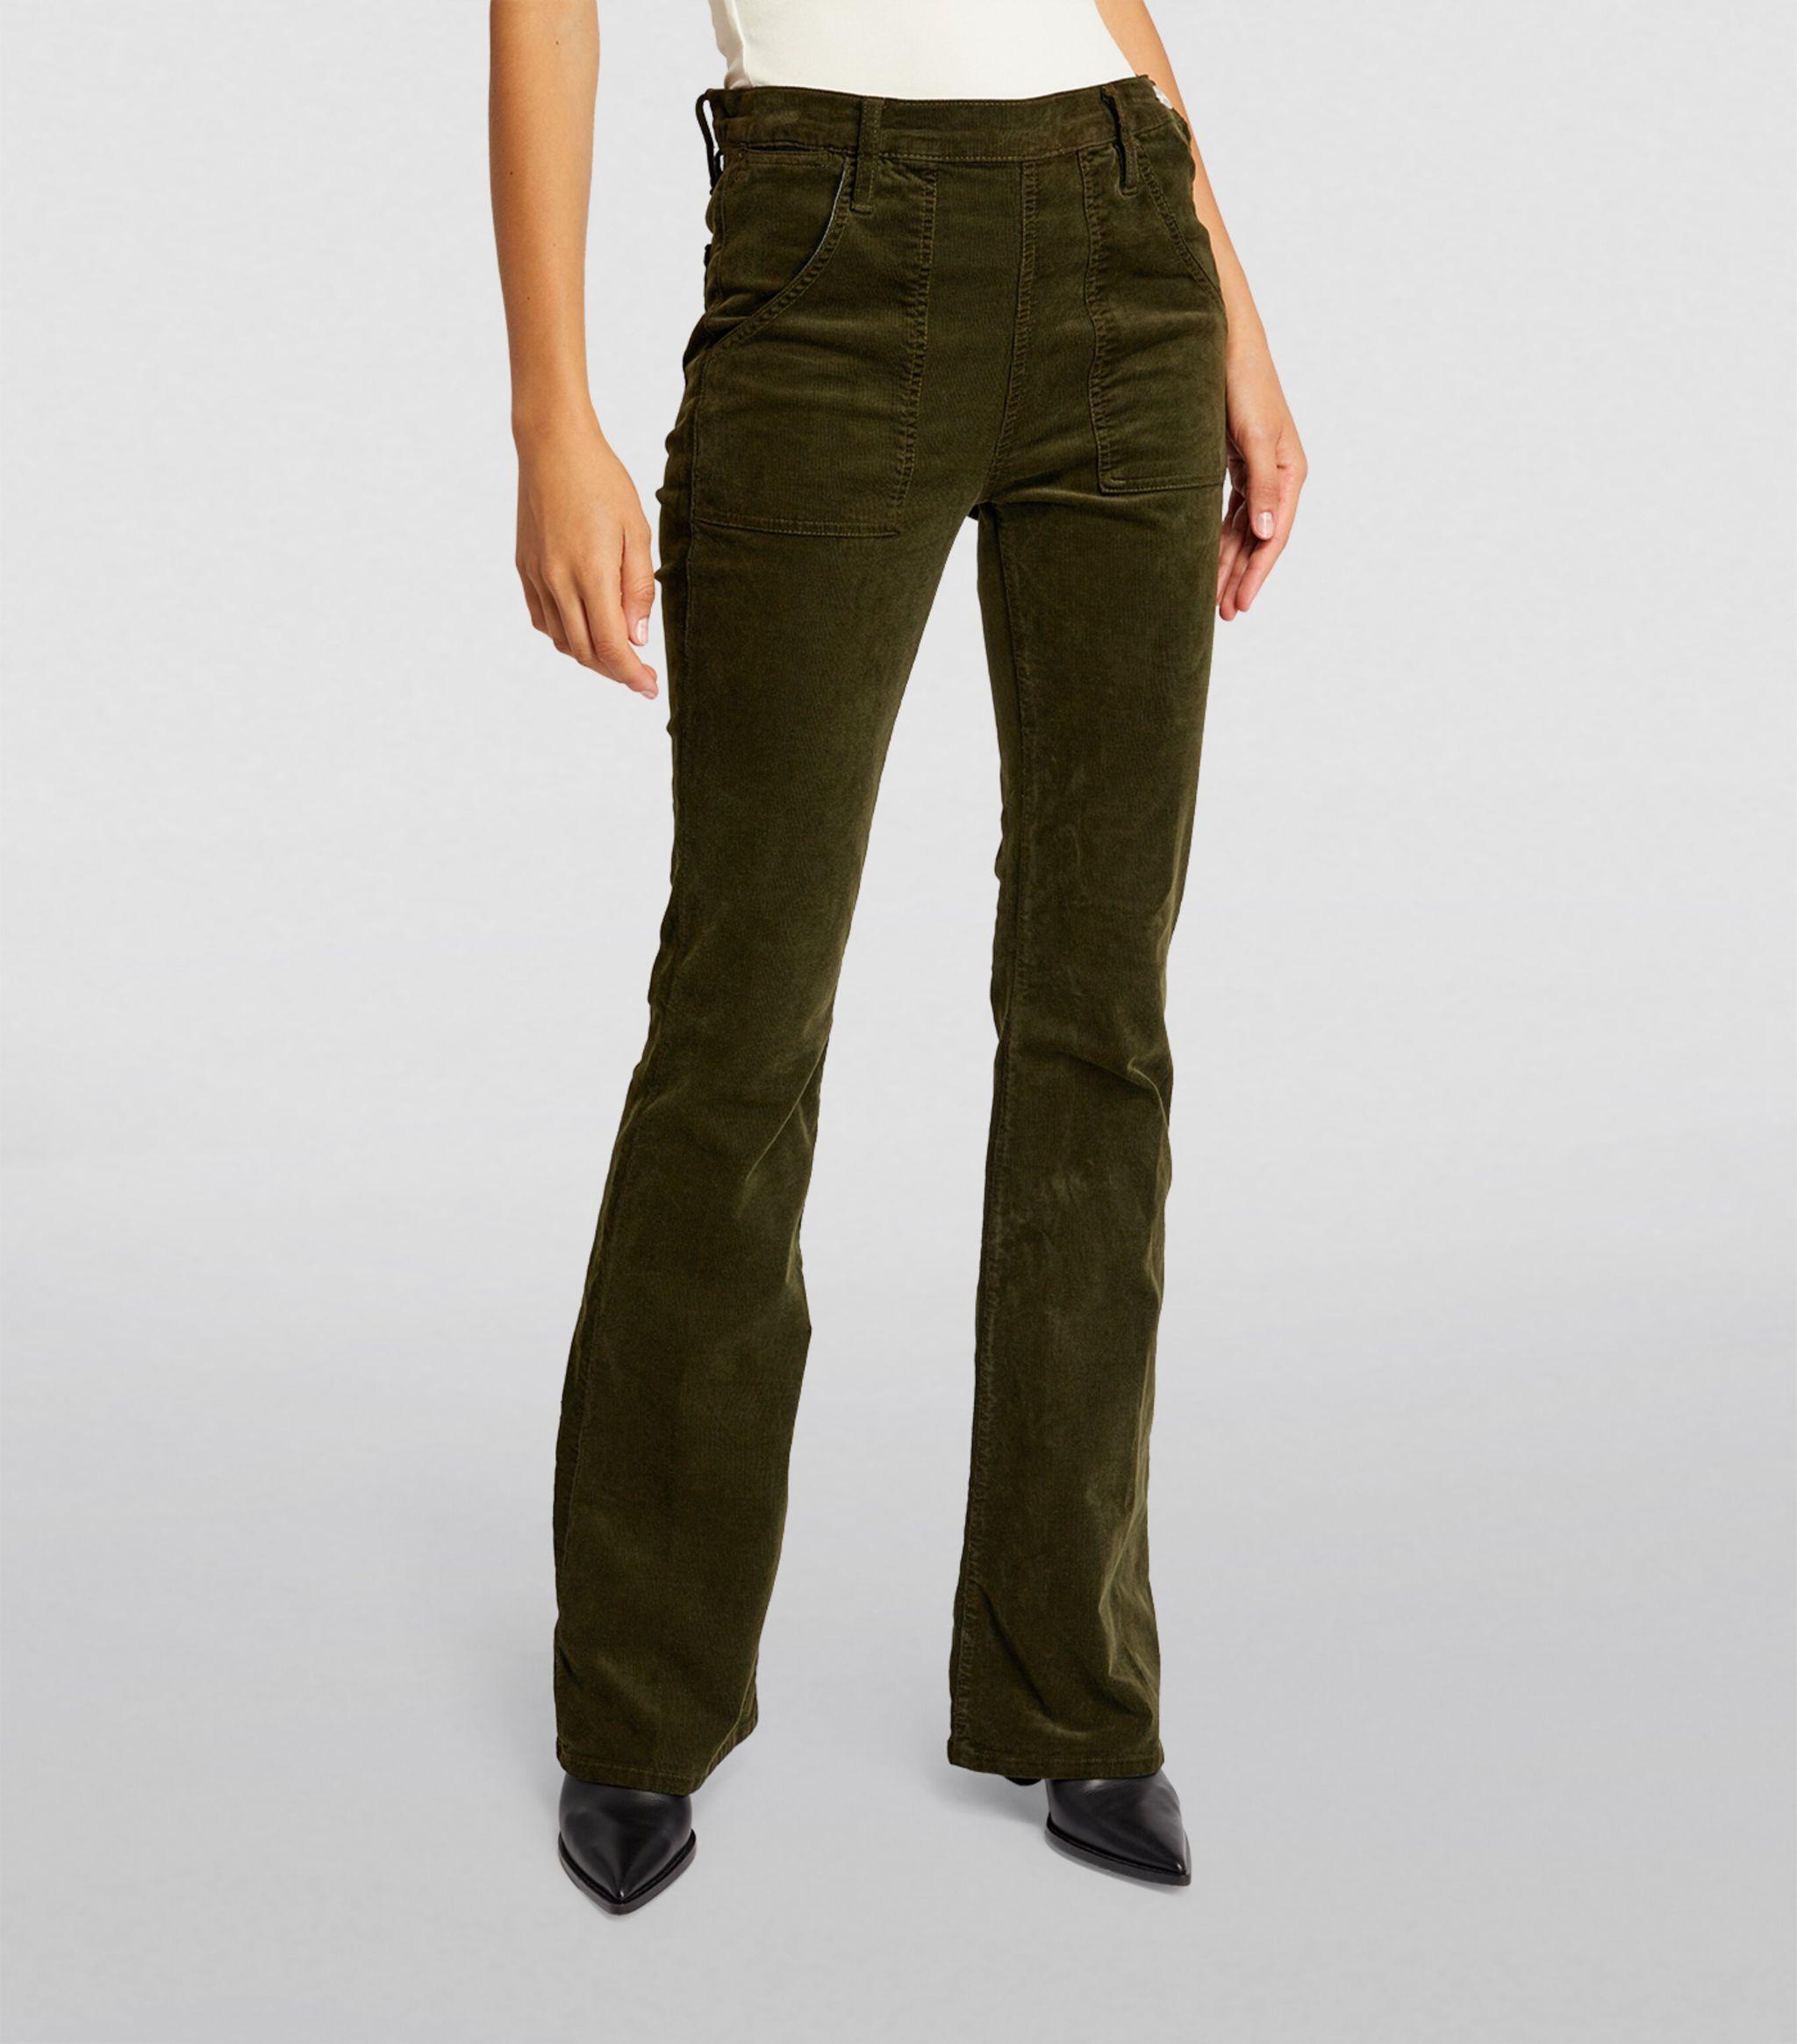 FRAME Corduroy Le Françoise Trousers in Green